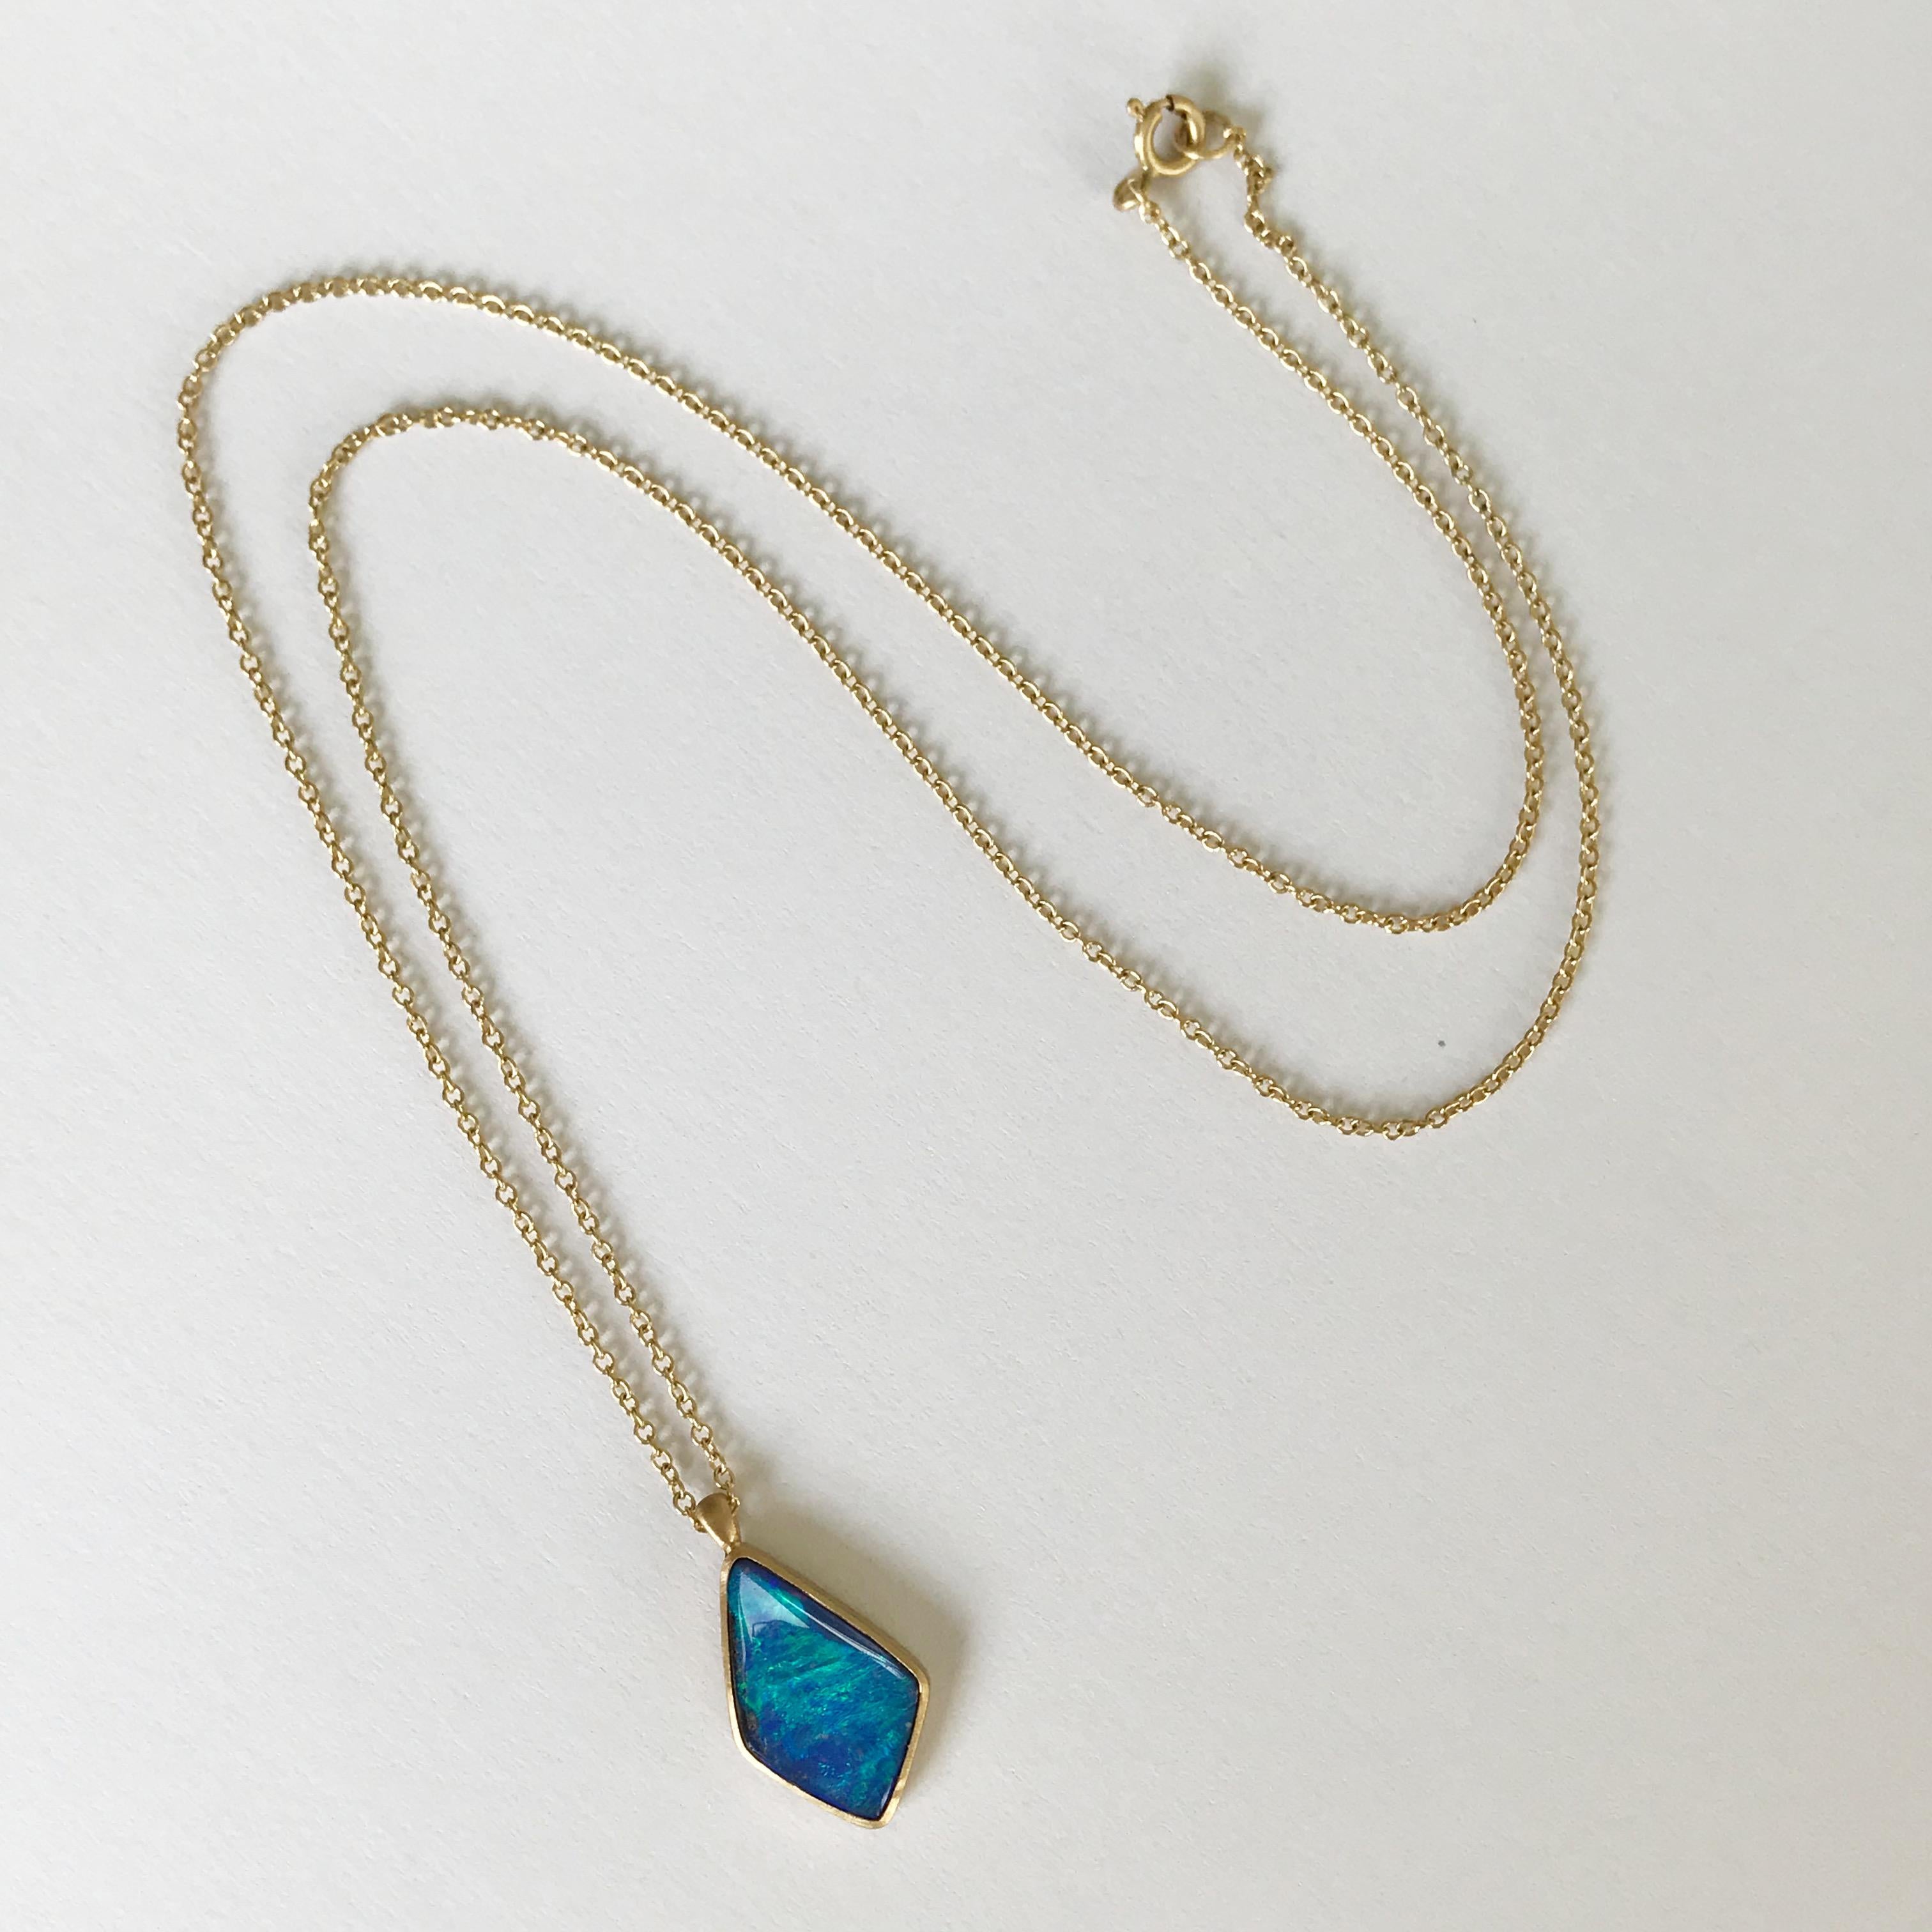 Dalben Design Australian Boulder Opal Yellow Gold Necklace In New Condition For Sale In Como, IT